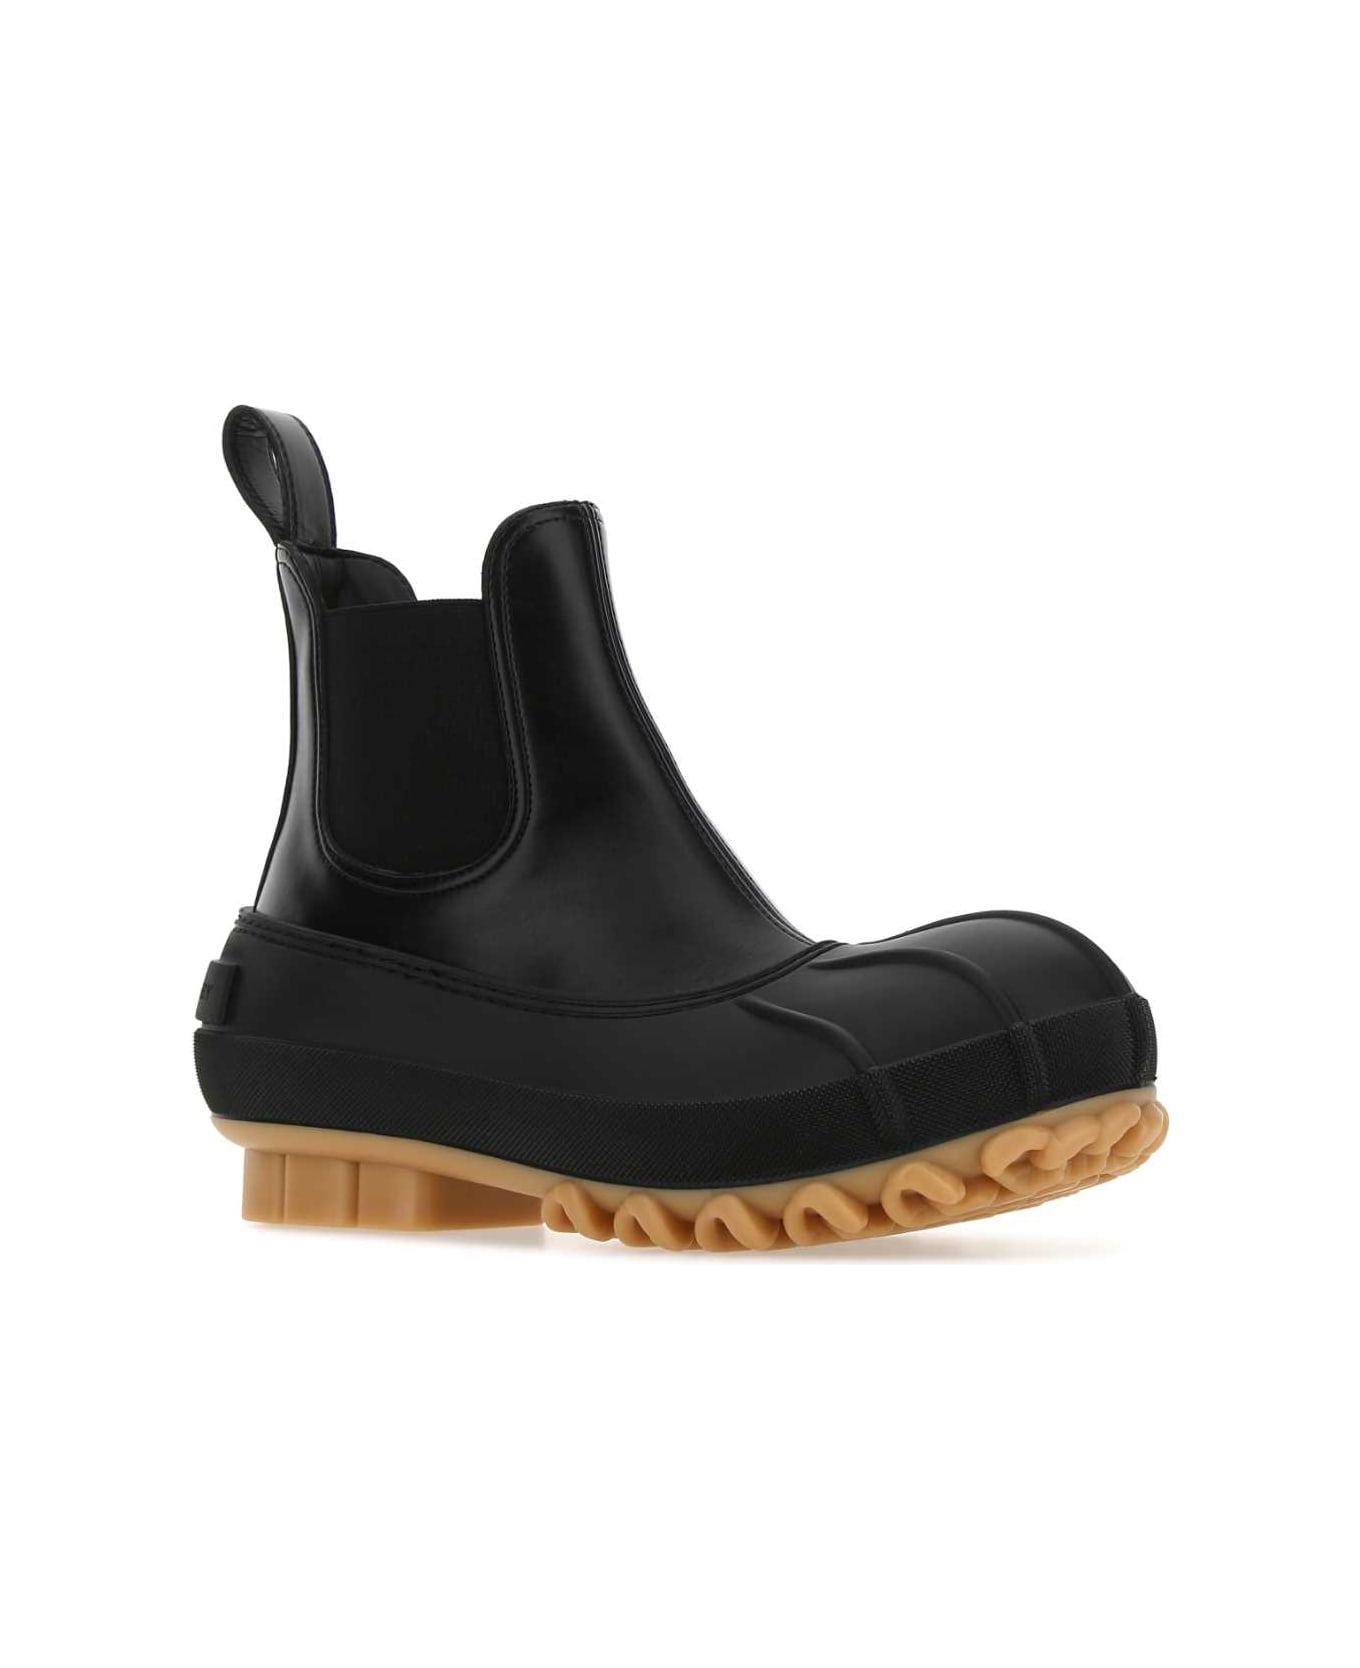 Stella McCartney Black Alter Mat And Rubber Duck City Ankle Boots - 1000